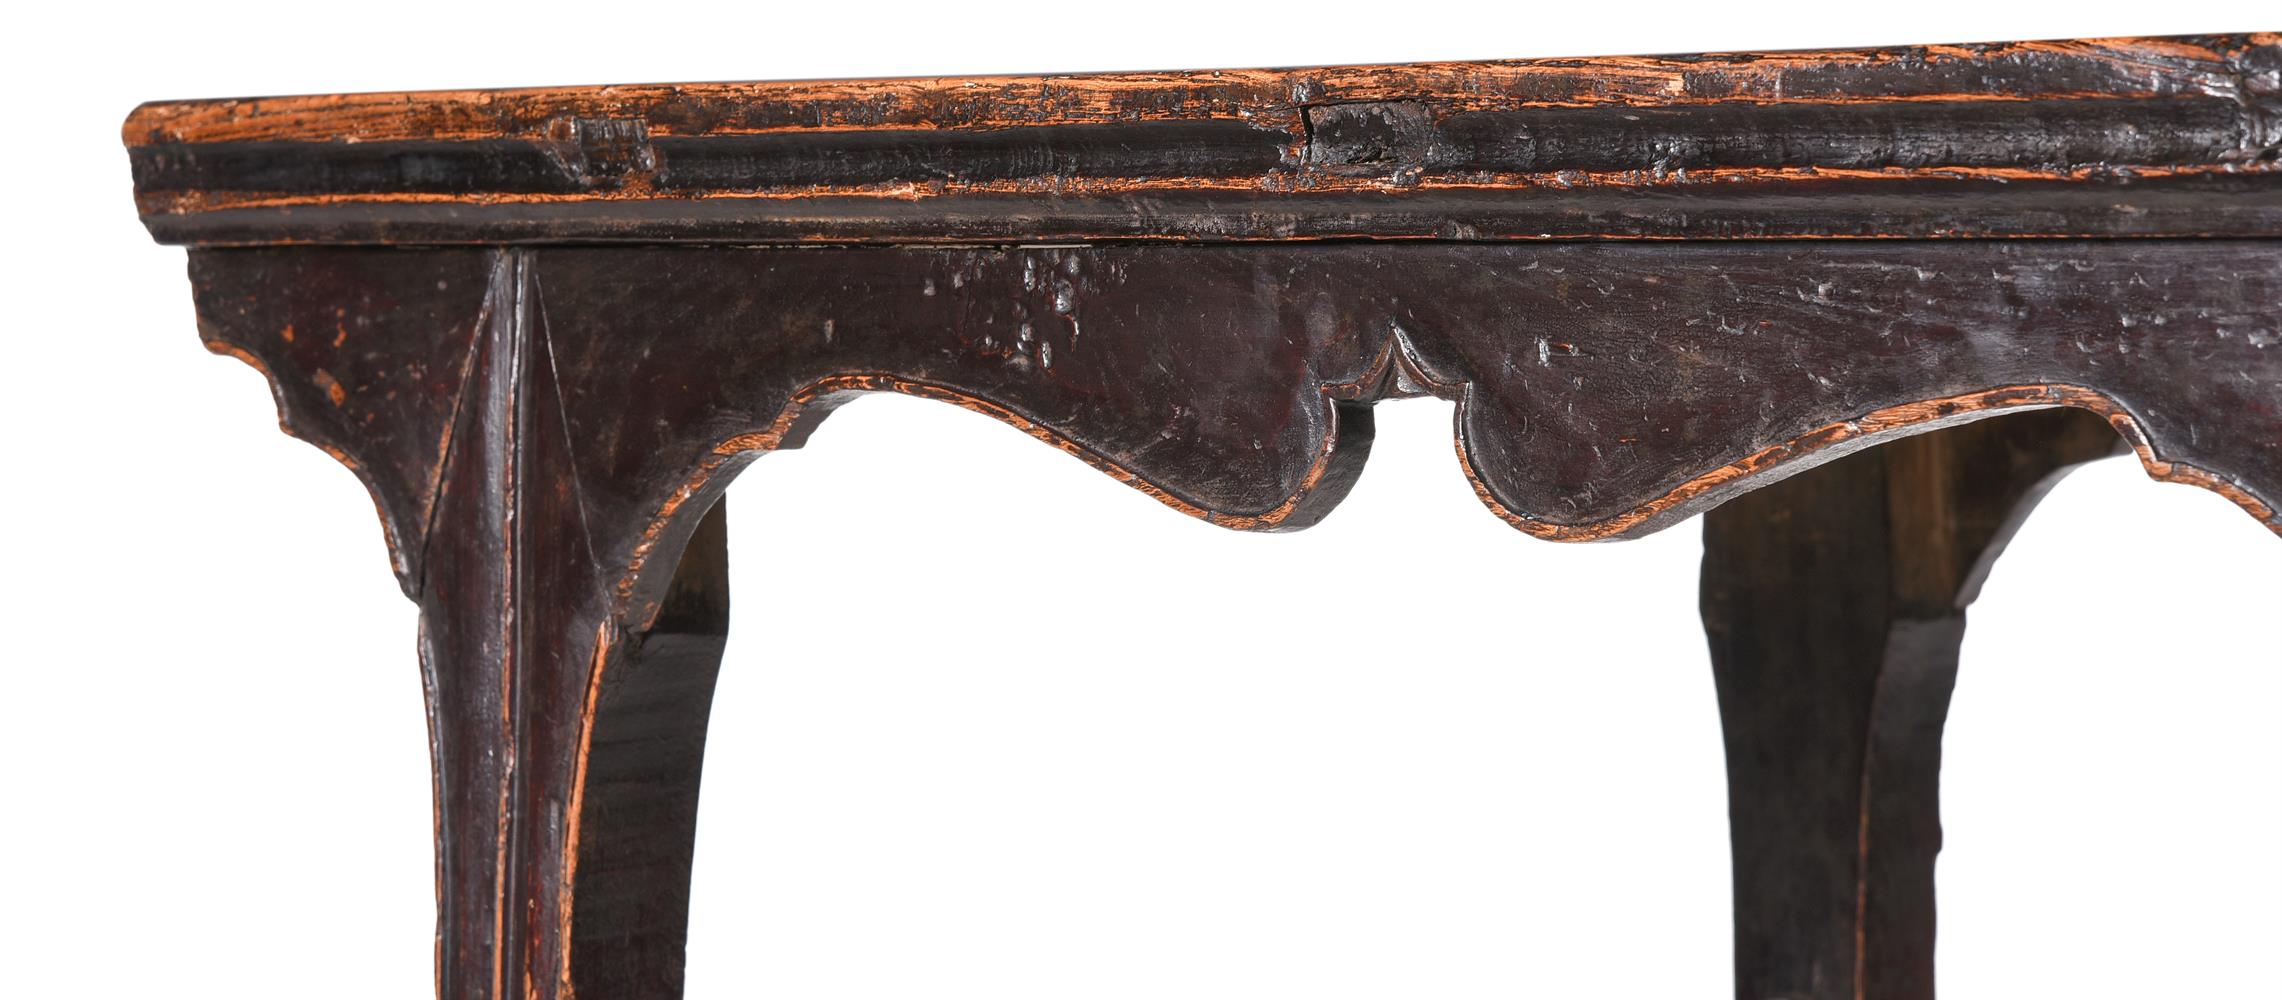 A Chinese lacquered wood alter table - Image 3 of 4